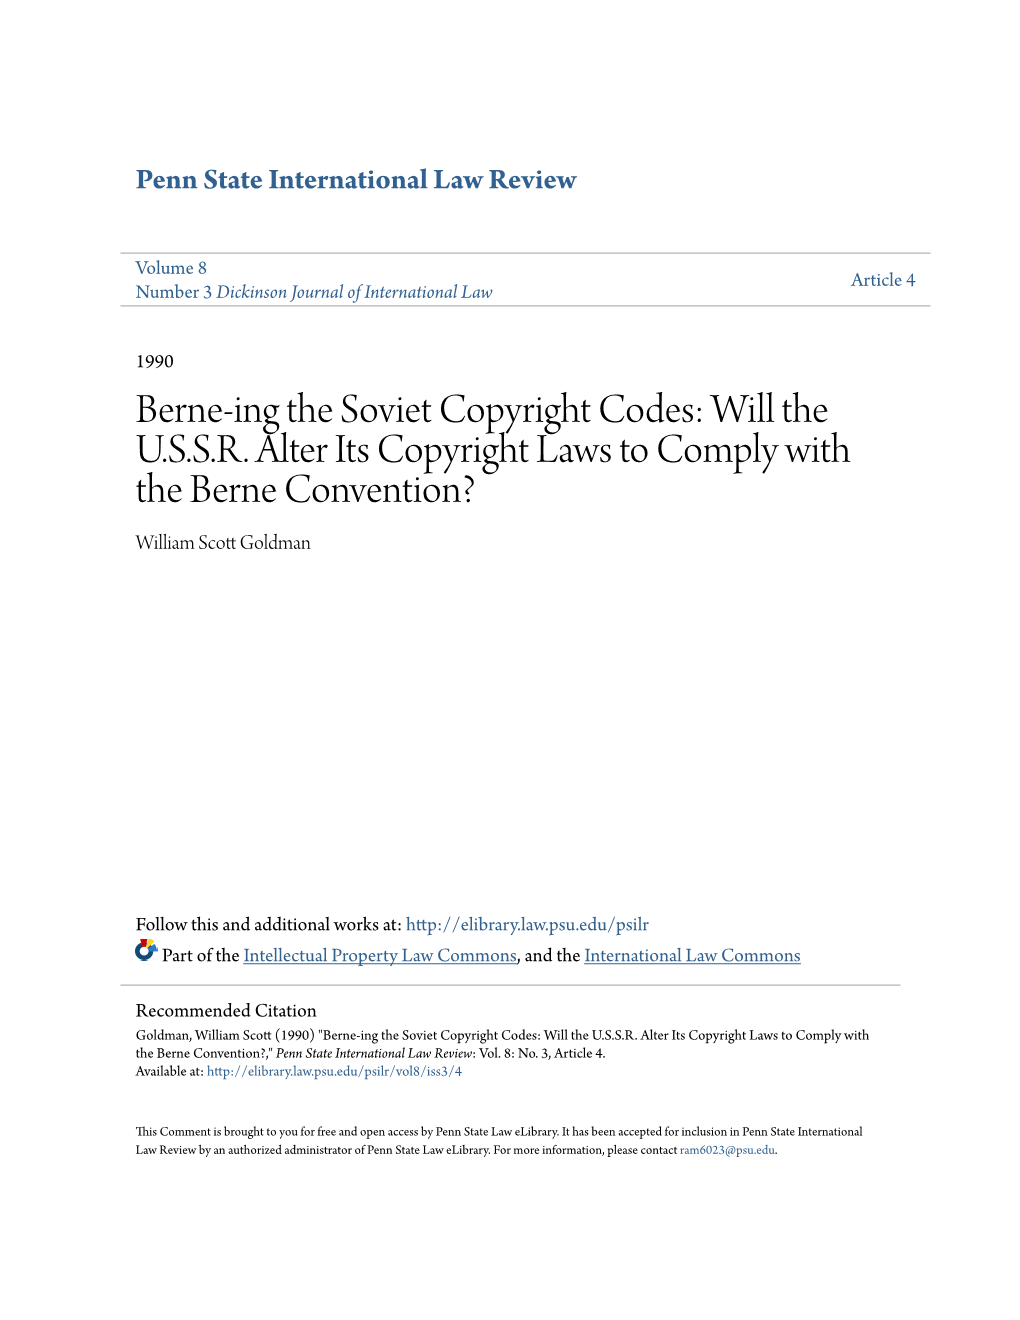 Berne-Ing the Soviet Copyright Codes: Will the U.S.S.R. Alter Its Copyright Laws to Comply with the Berne Convention? William Scott Goldman